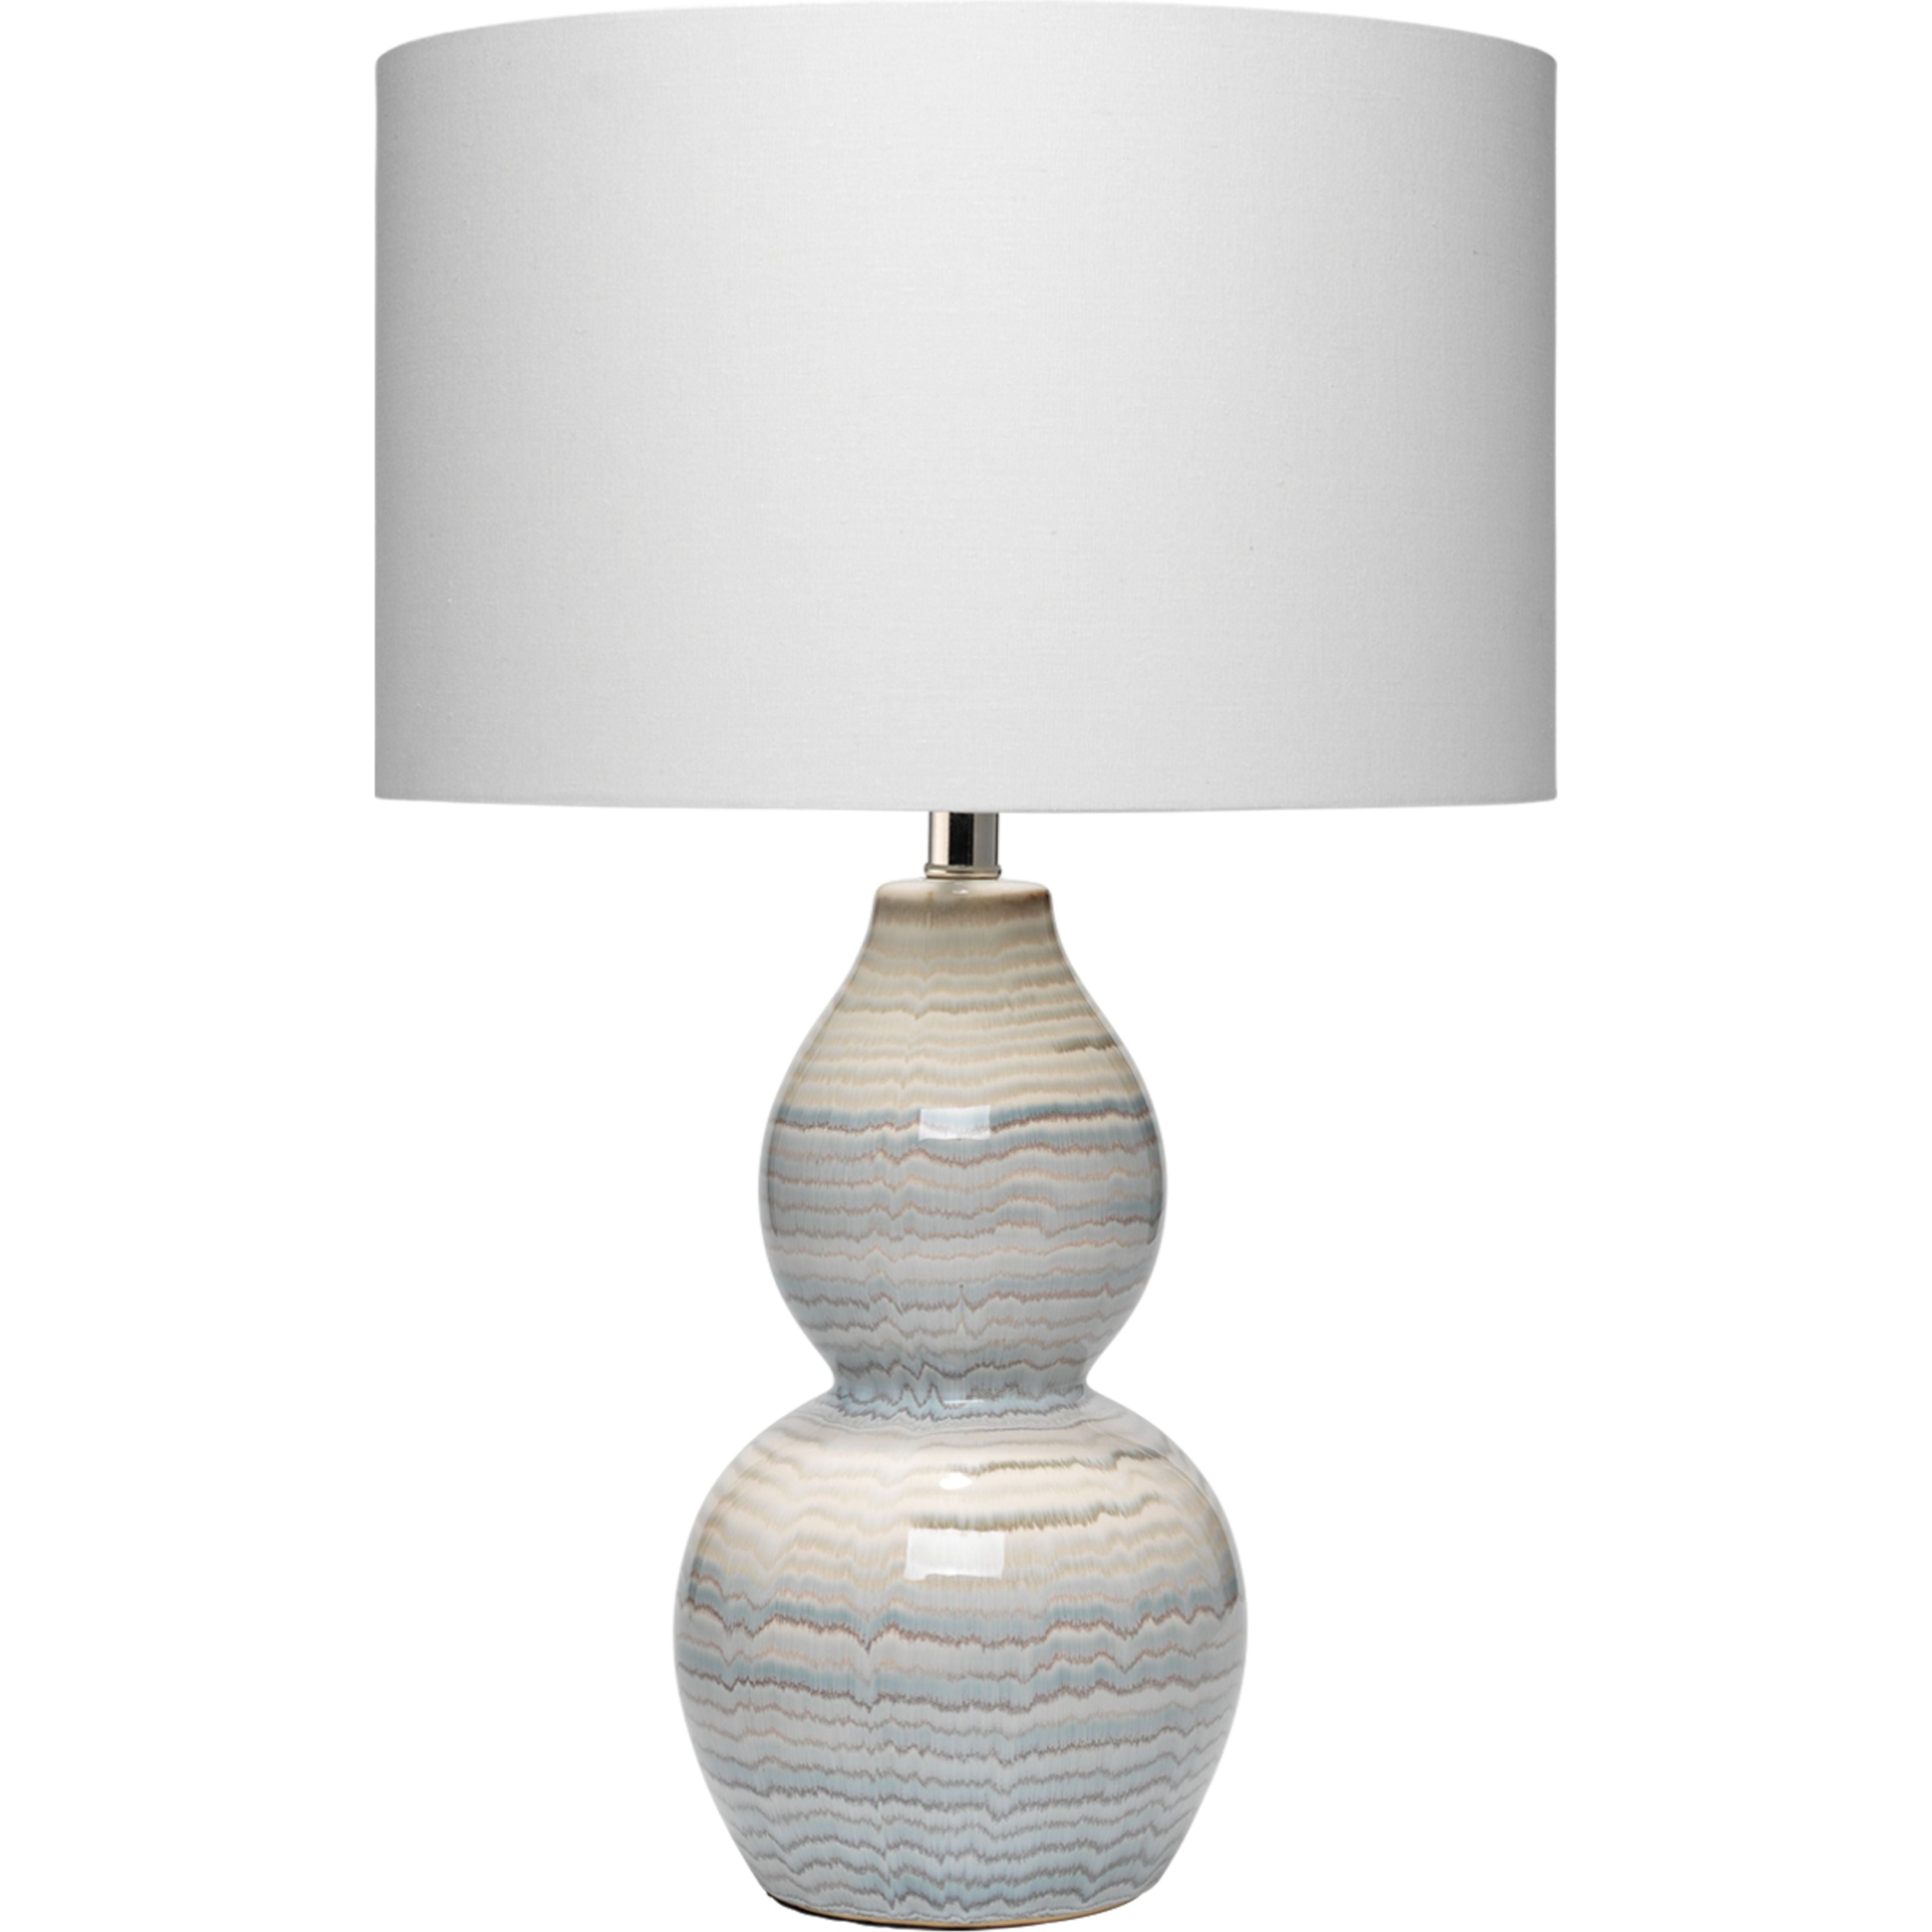 Jamie Young Company - LSCATALINAWH - Catalina Wave Table Lamp -  - White/Blue